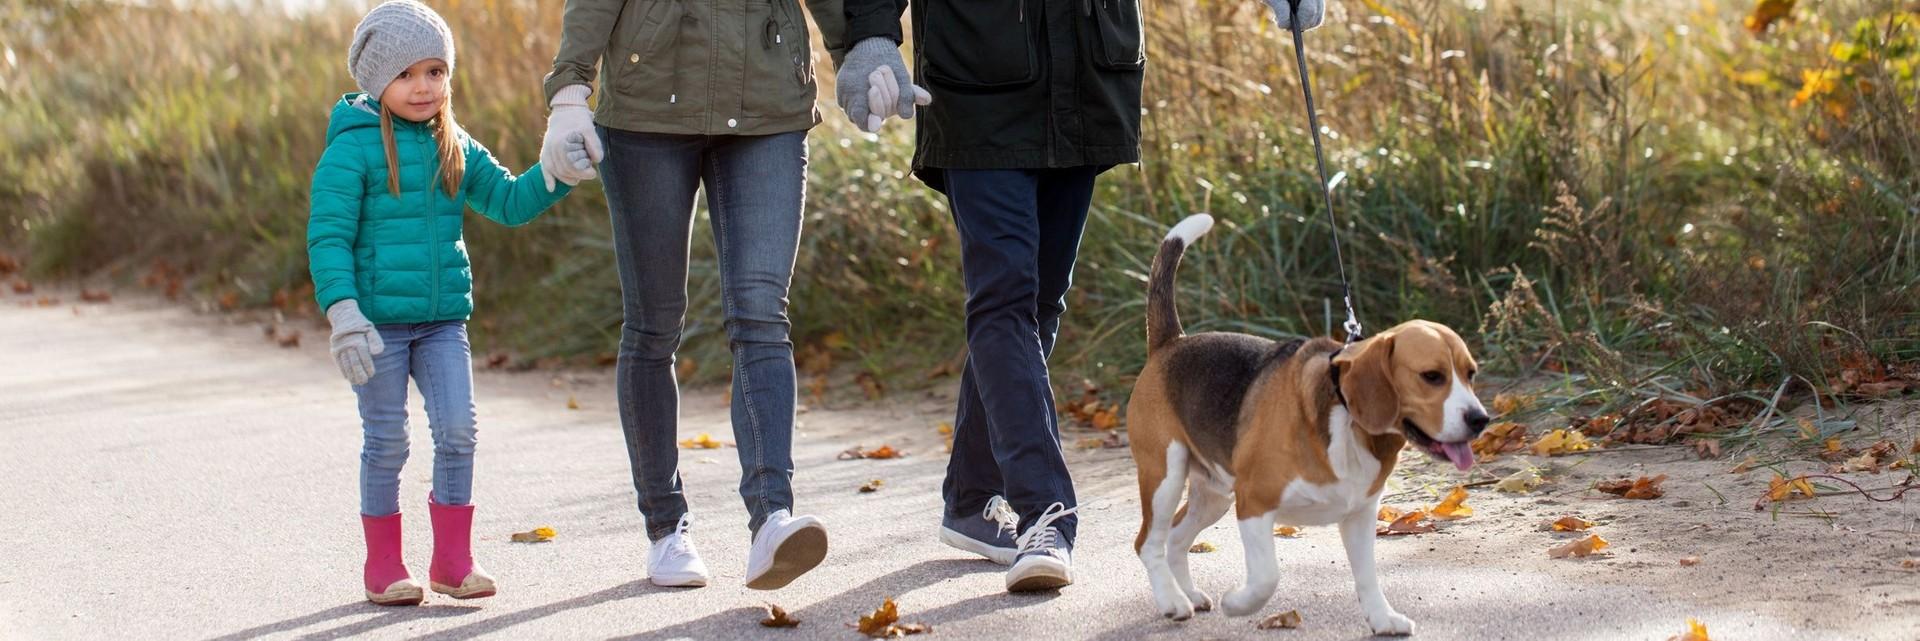 Family walking with a dog